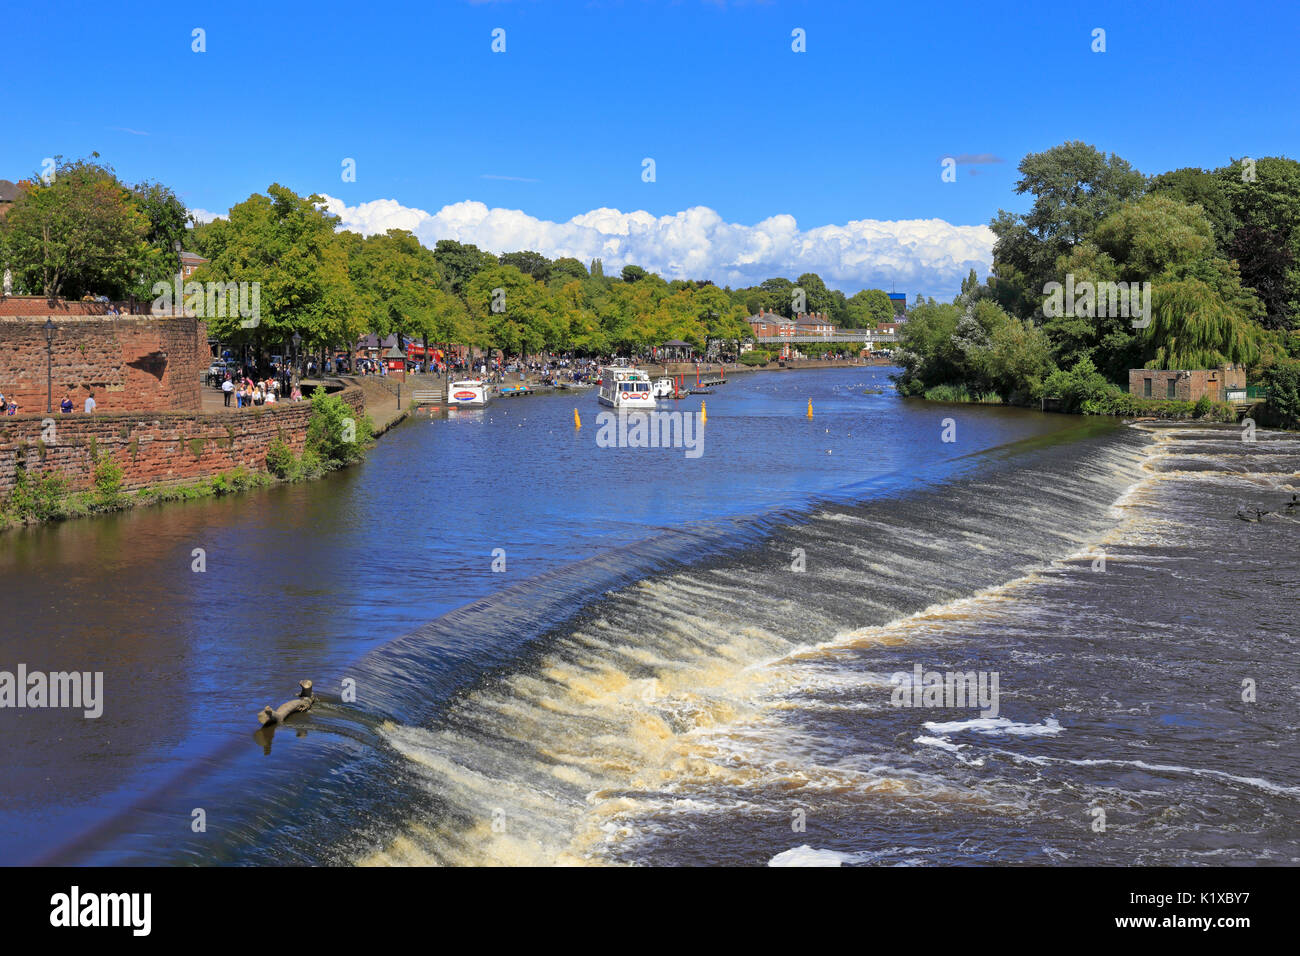 The weir on the River Dee, Chester, Cheshire, England, UK. Stock Photo